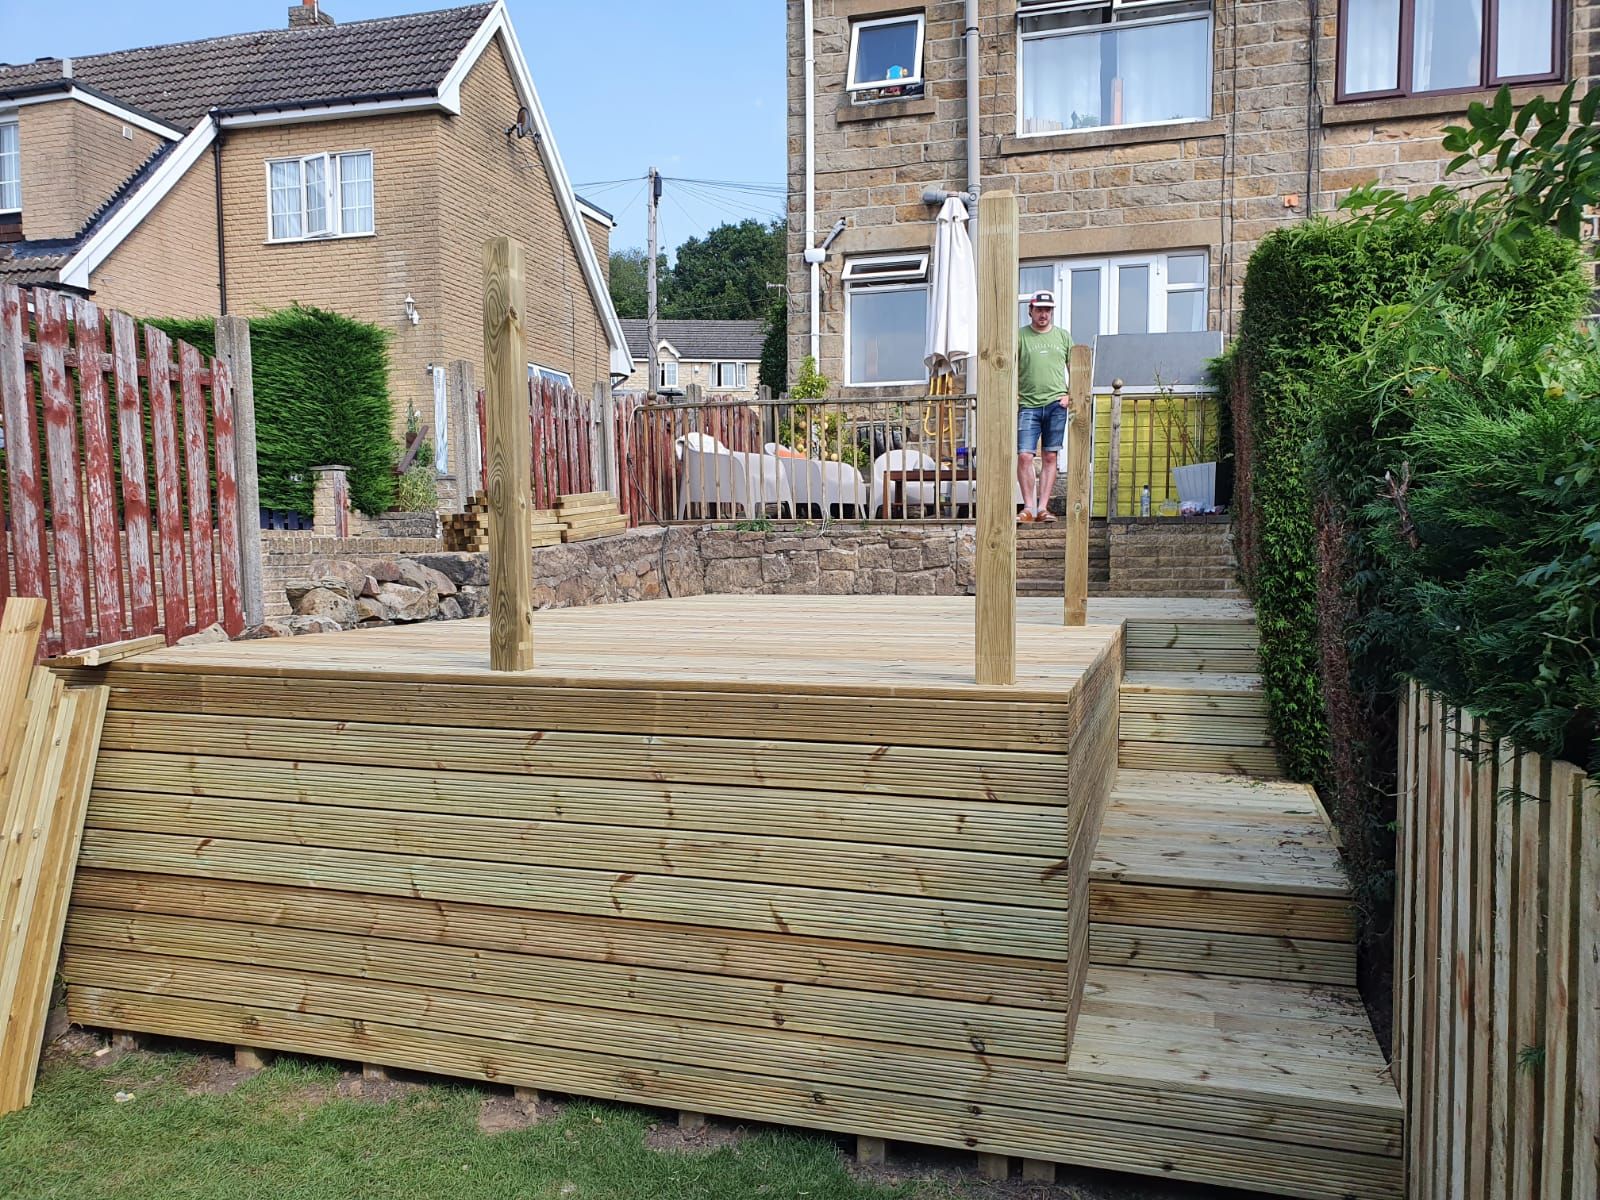 Raised wooden decking being constructed in a Gibbons Down back garden